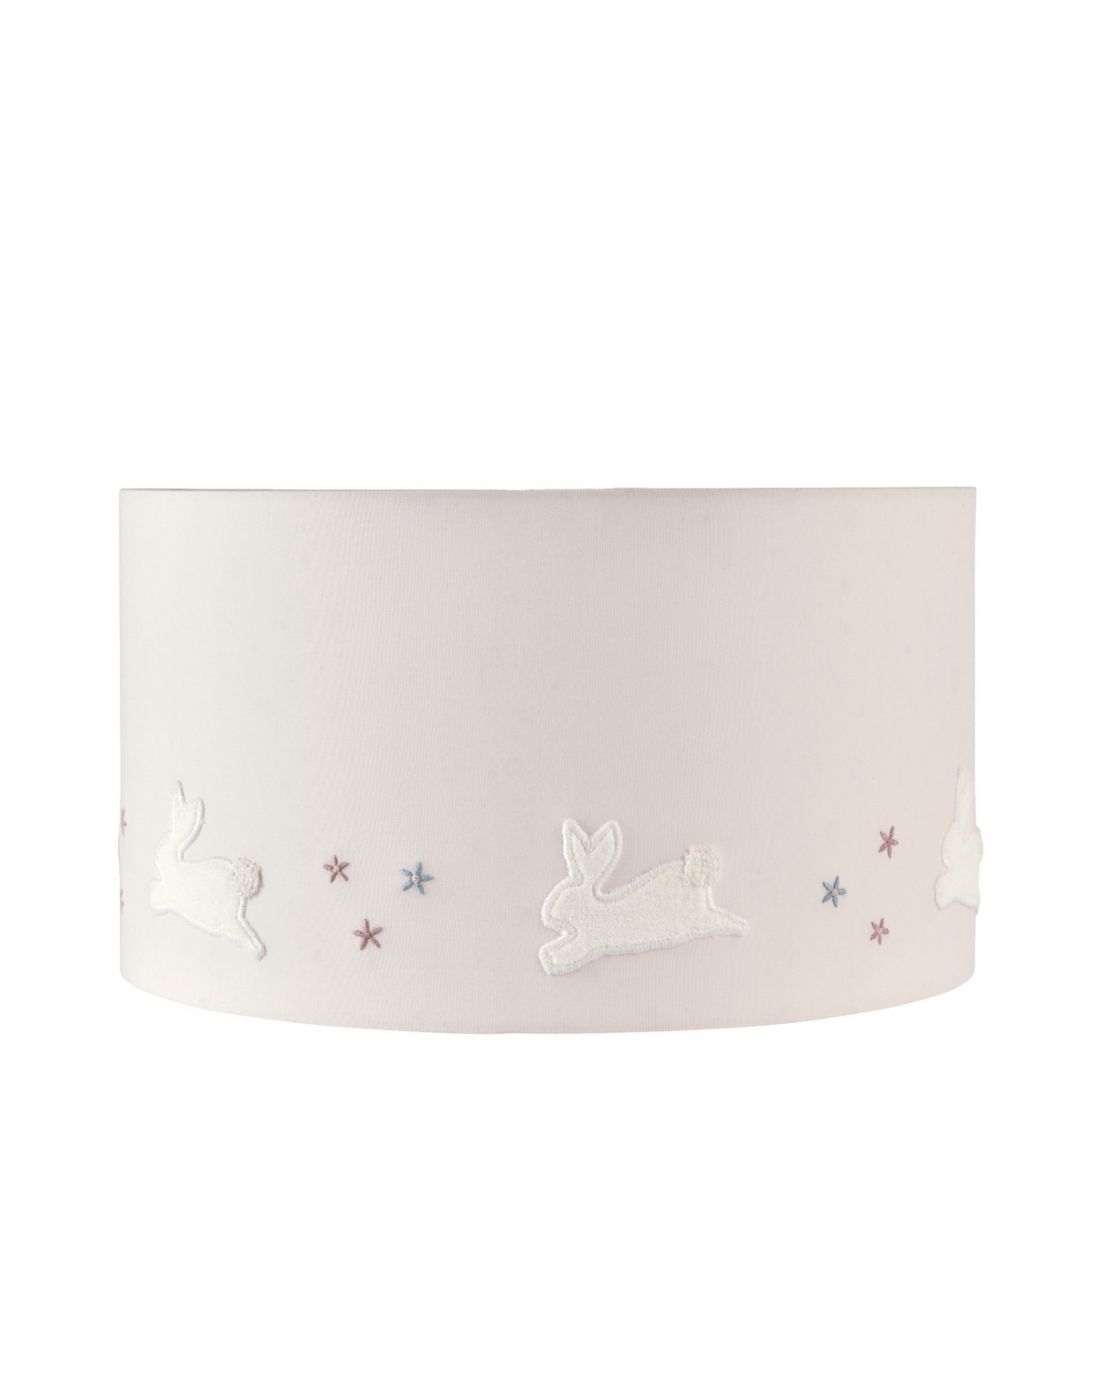 Mamas & Papas Lampshade Welcome to the World Floral Girl